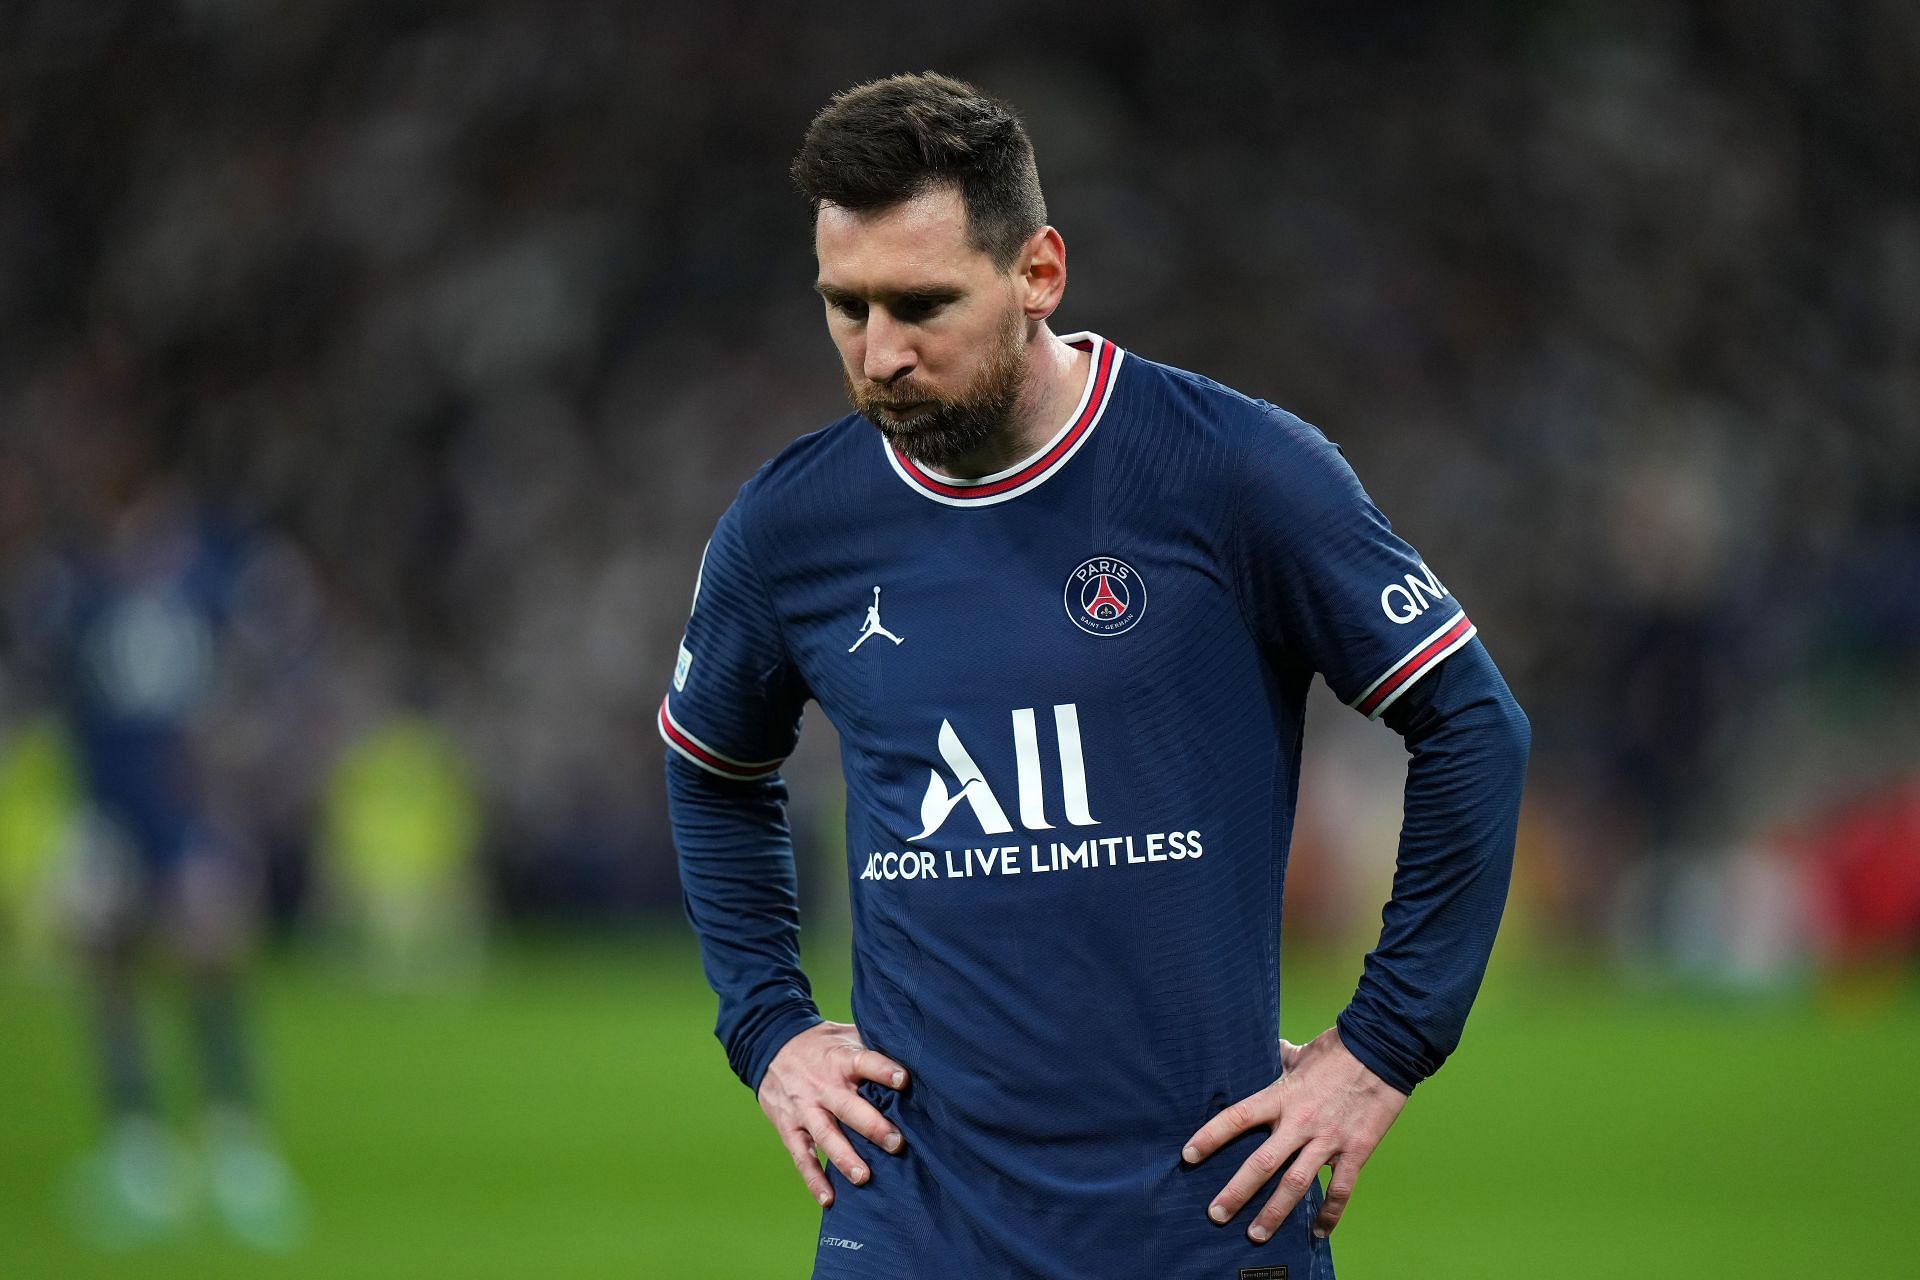 PSG Transfer News Roundup: Lionel Messi has no emotions, says Paolo Di Canio;  Parisians include Diego Simeone in managerial shortlist, and more - 14  March 2022